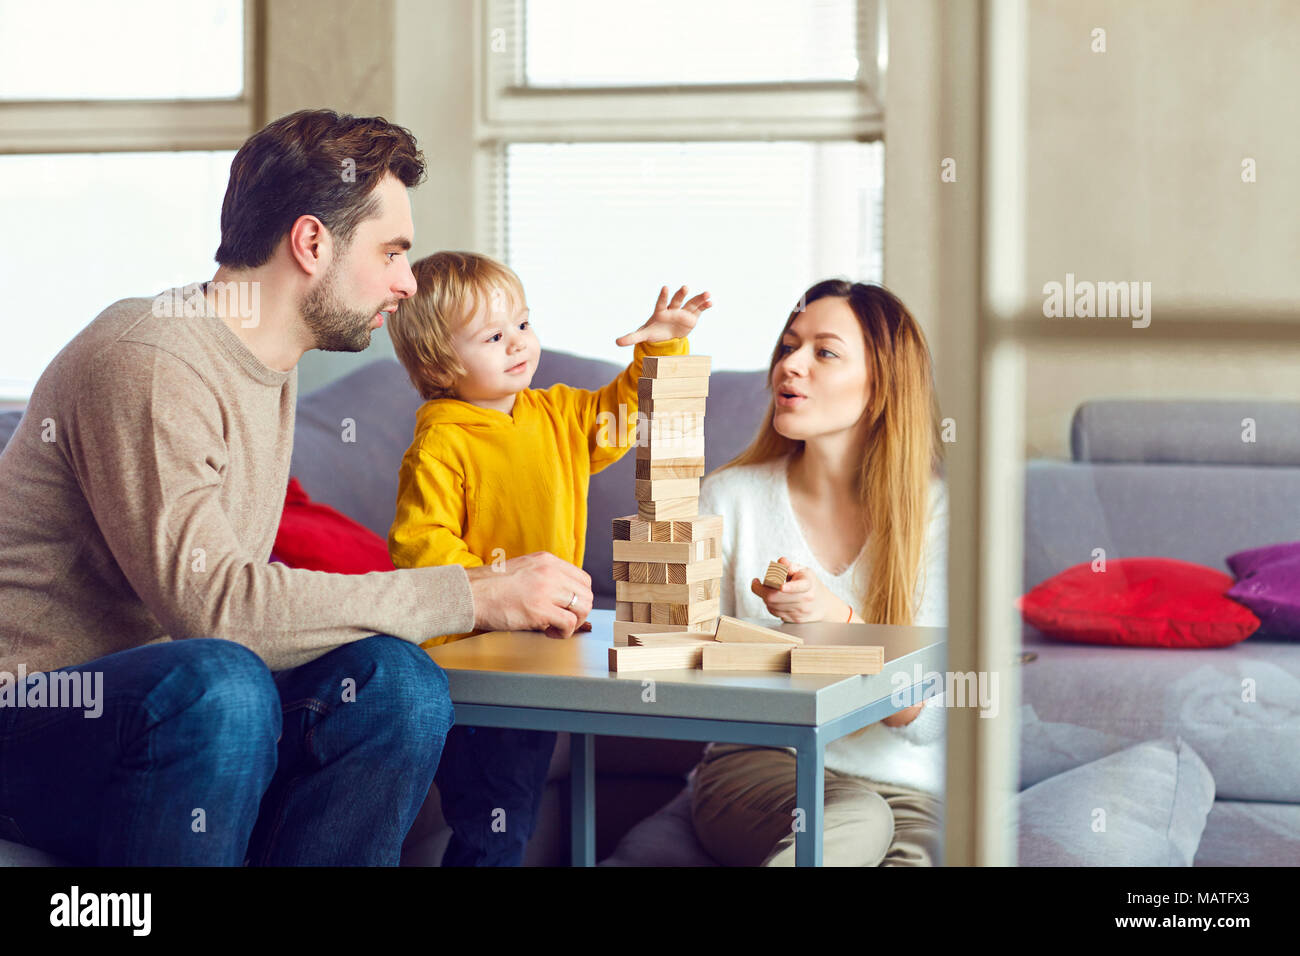 A child with parents plays table games on the table. Stock Photo